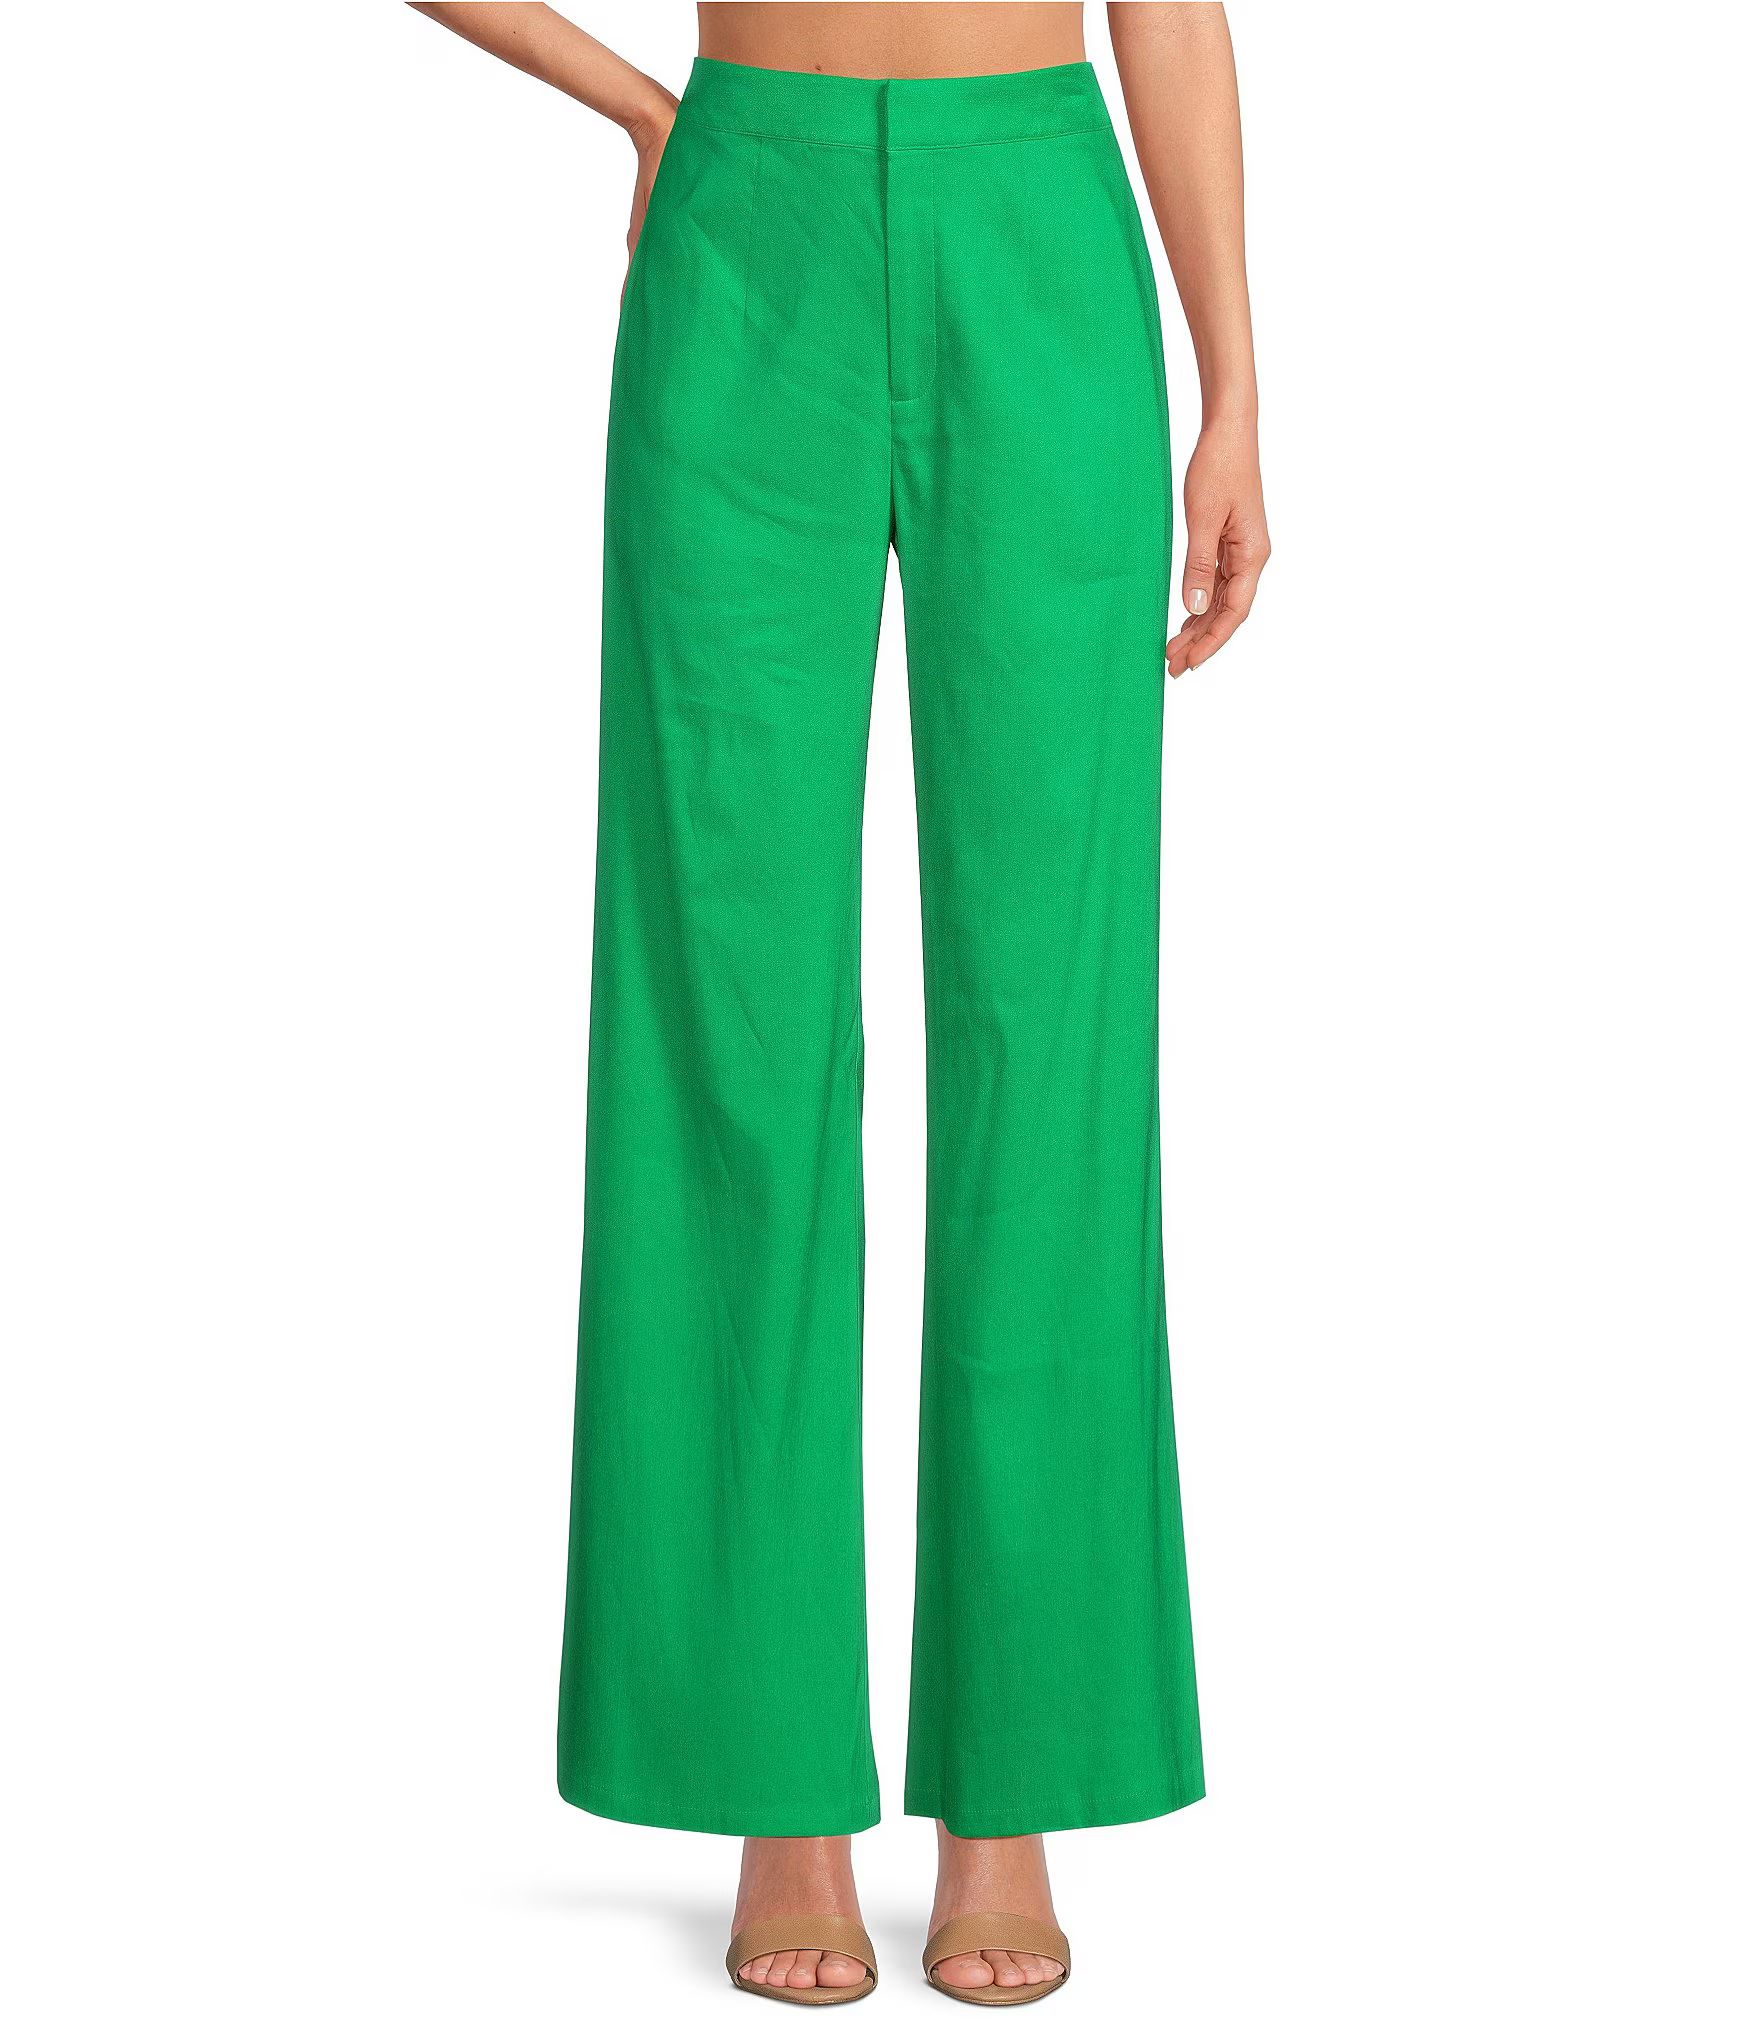 Gianni Bini
Lucie Linen High Rise Wide Leg Trousers
$99.00
Be the first toWrite A Review
 | Dillard's